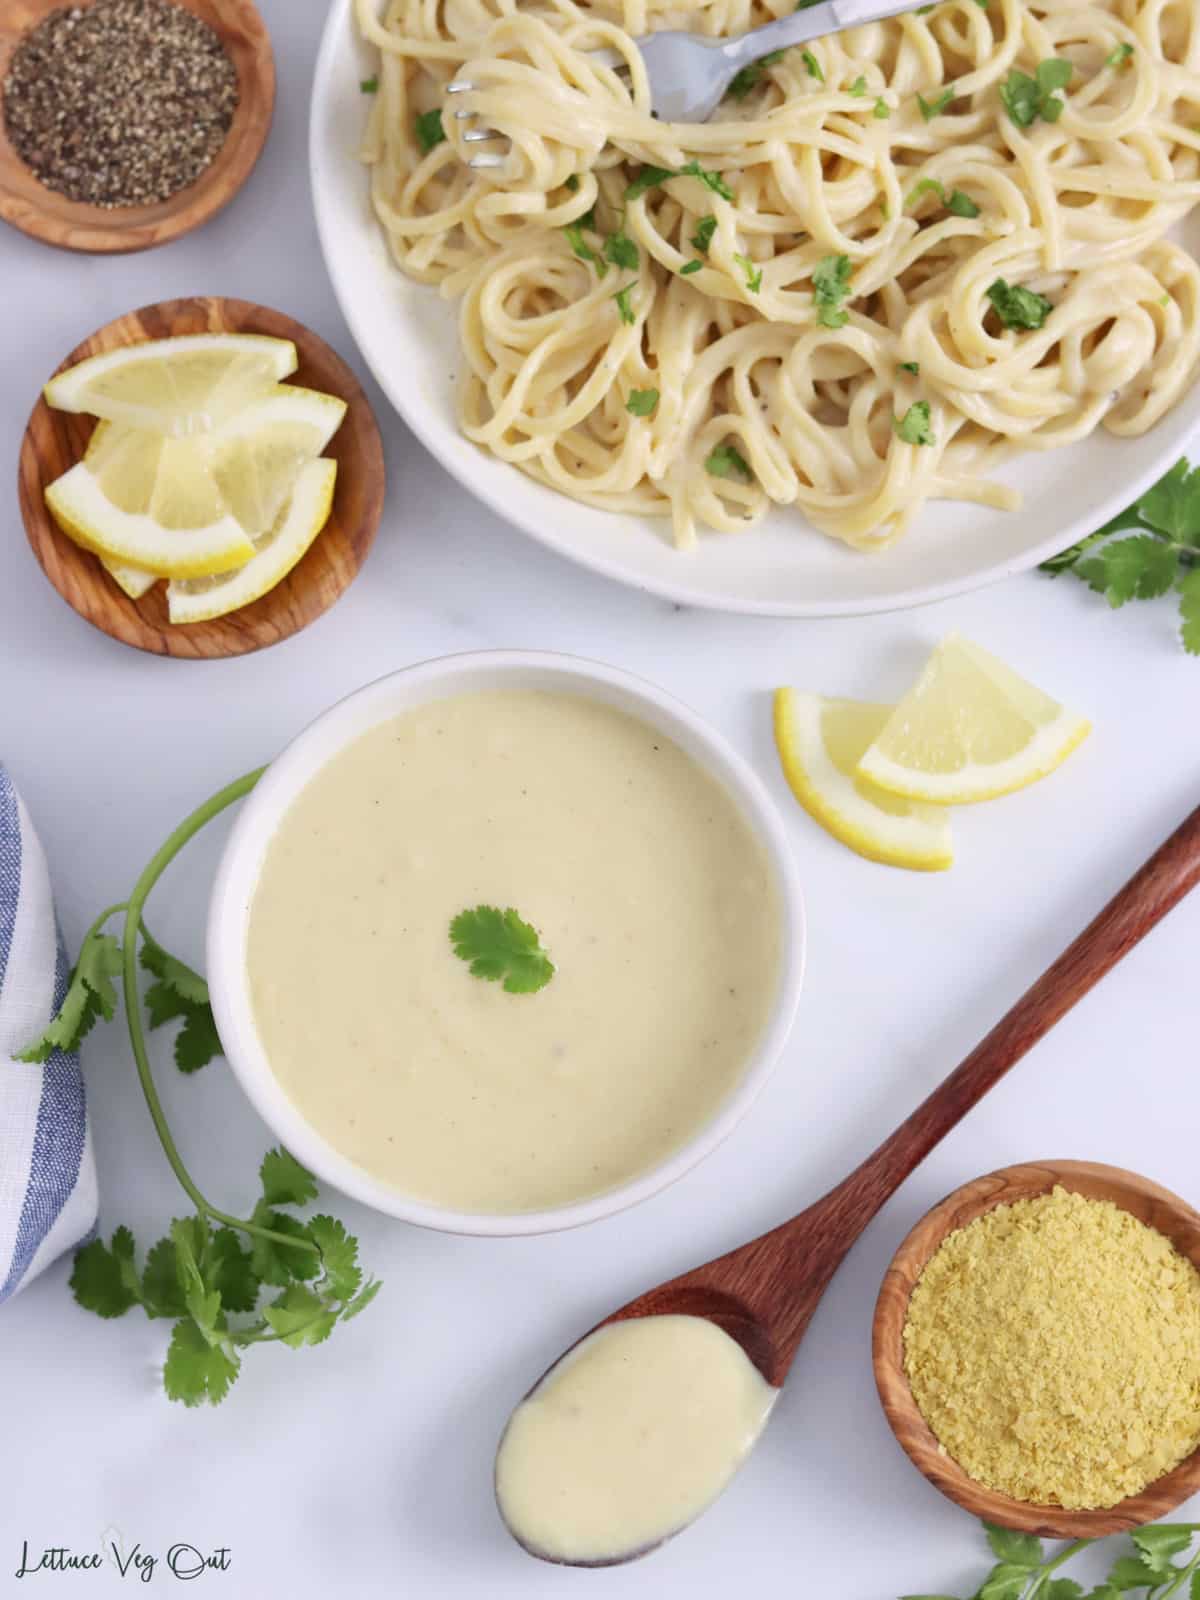 Bowl of white sauce with spoonful of sauce, lemon slices, and a plate of pasta tossed in bechamel surrounding the bowl.